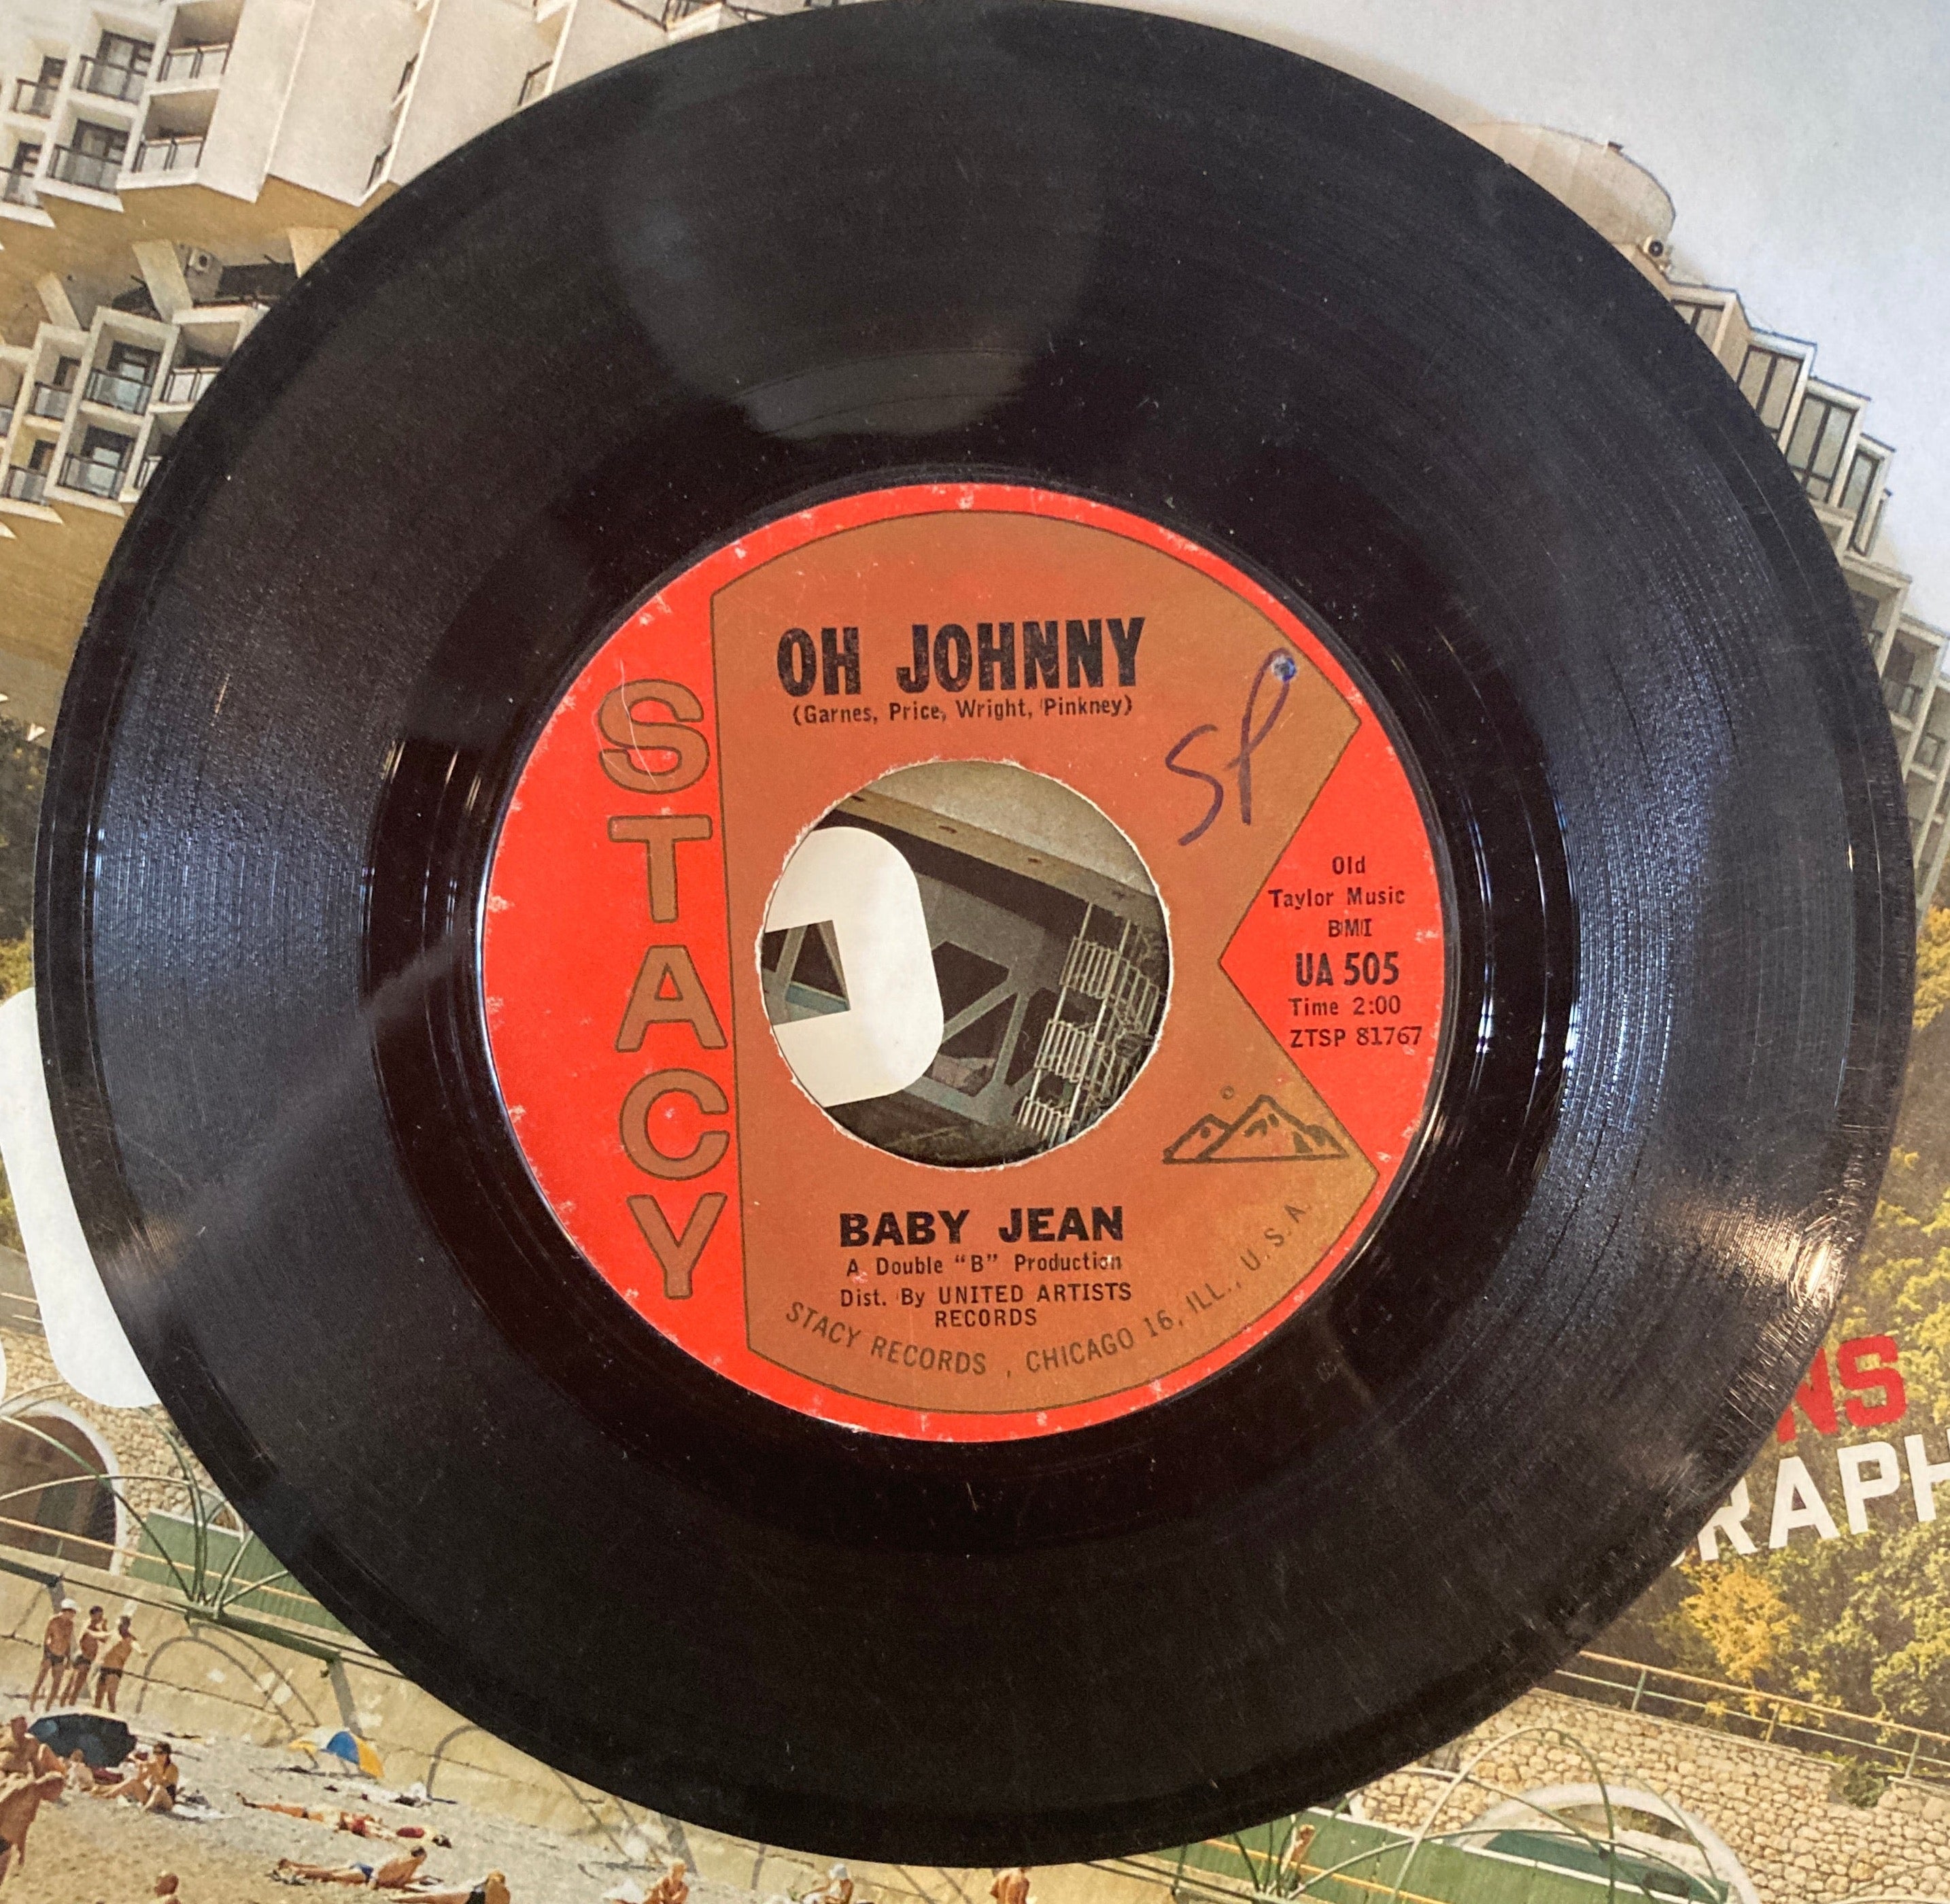 Baby Jean If You Wanna/Oh Johnny 7" 45rpm 1962 Stacy Records UA 505